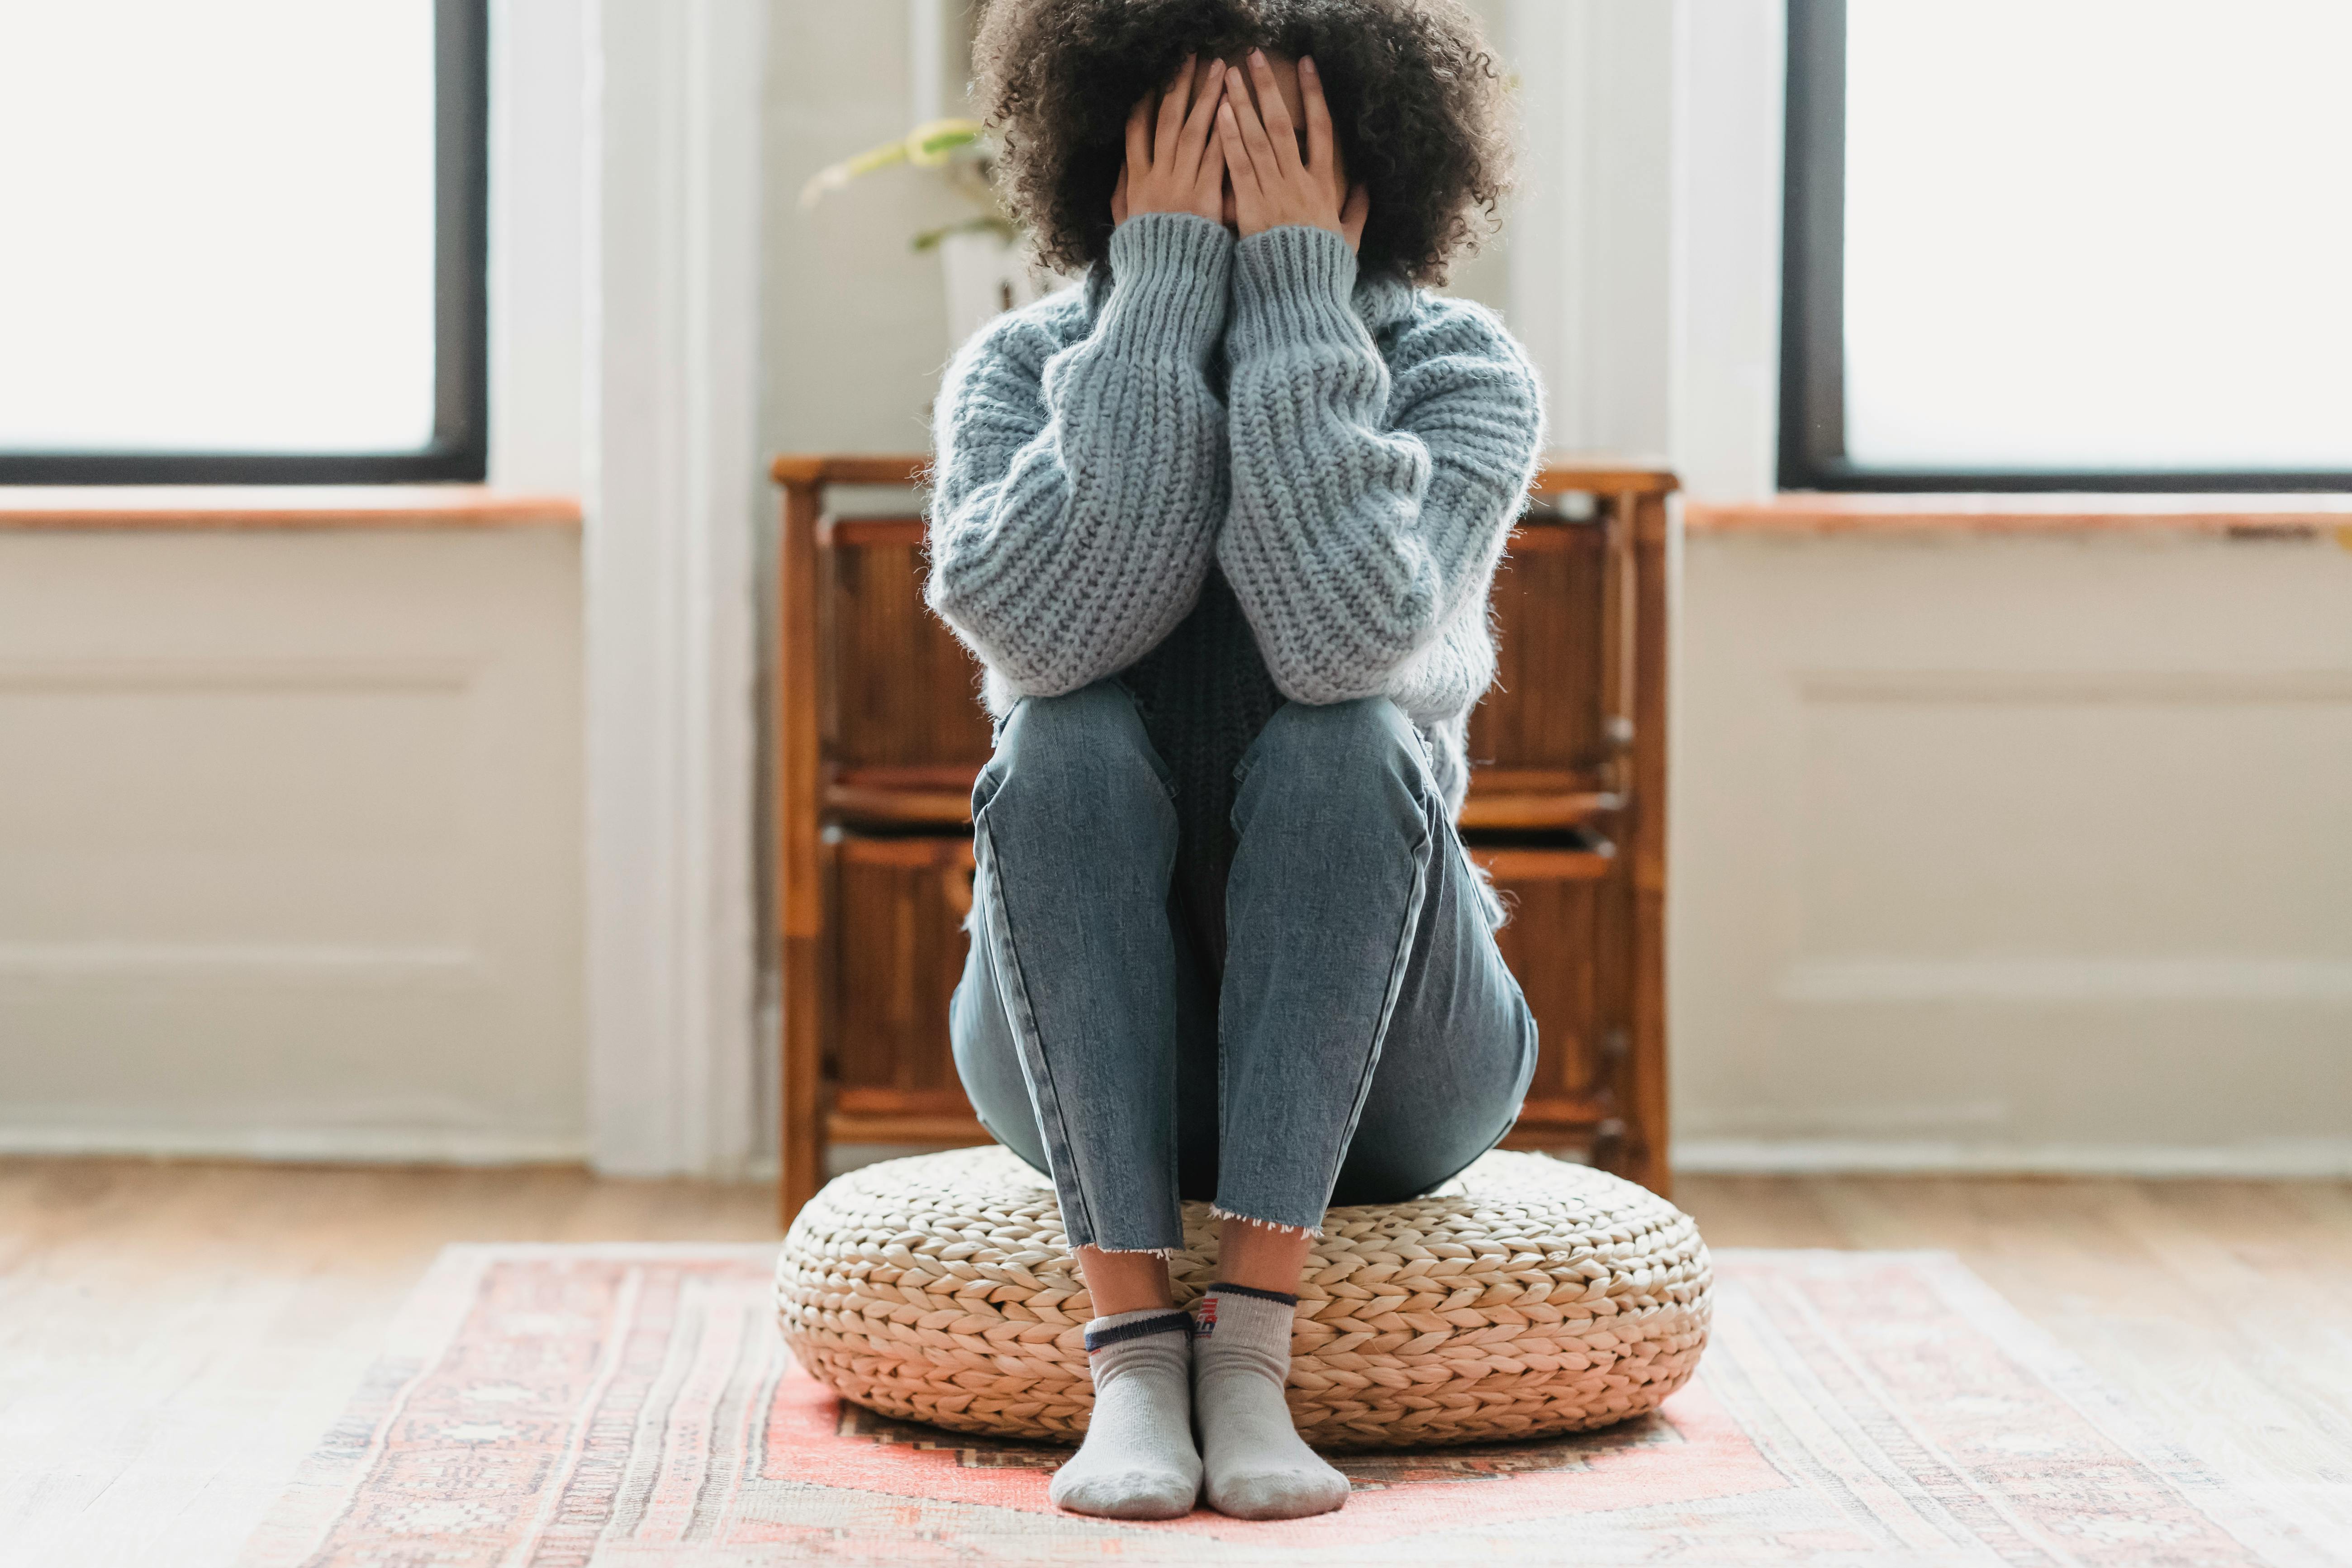 An upset woman sitting on a cushion with her hands covering her face | Source: Pexels